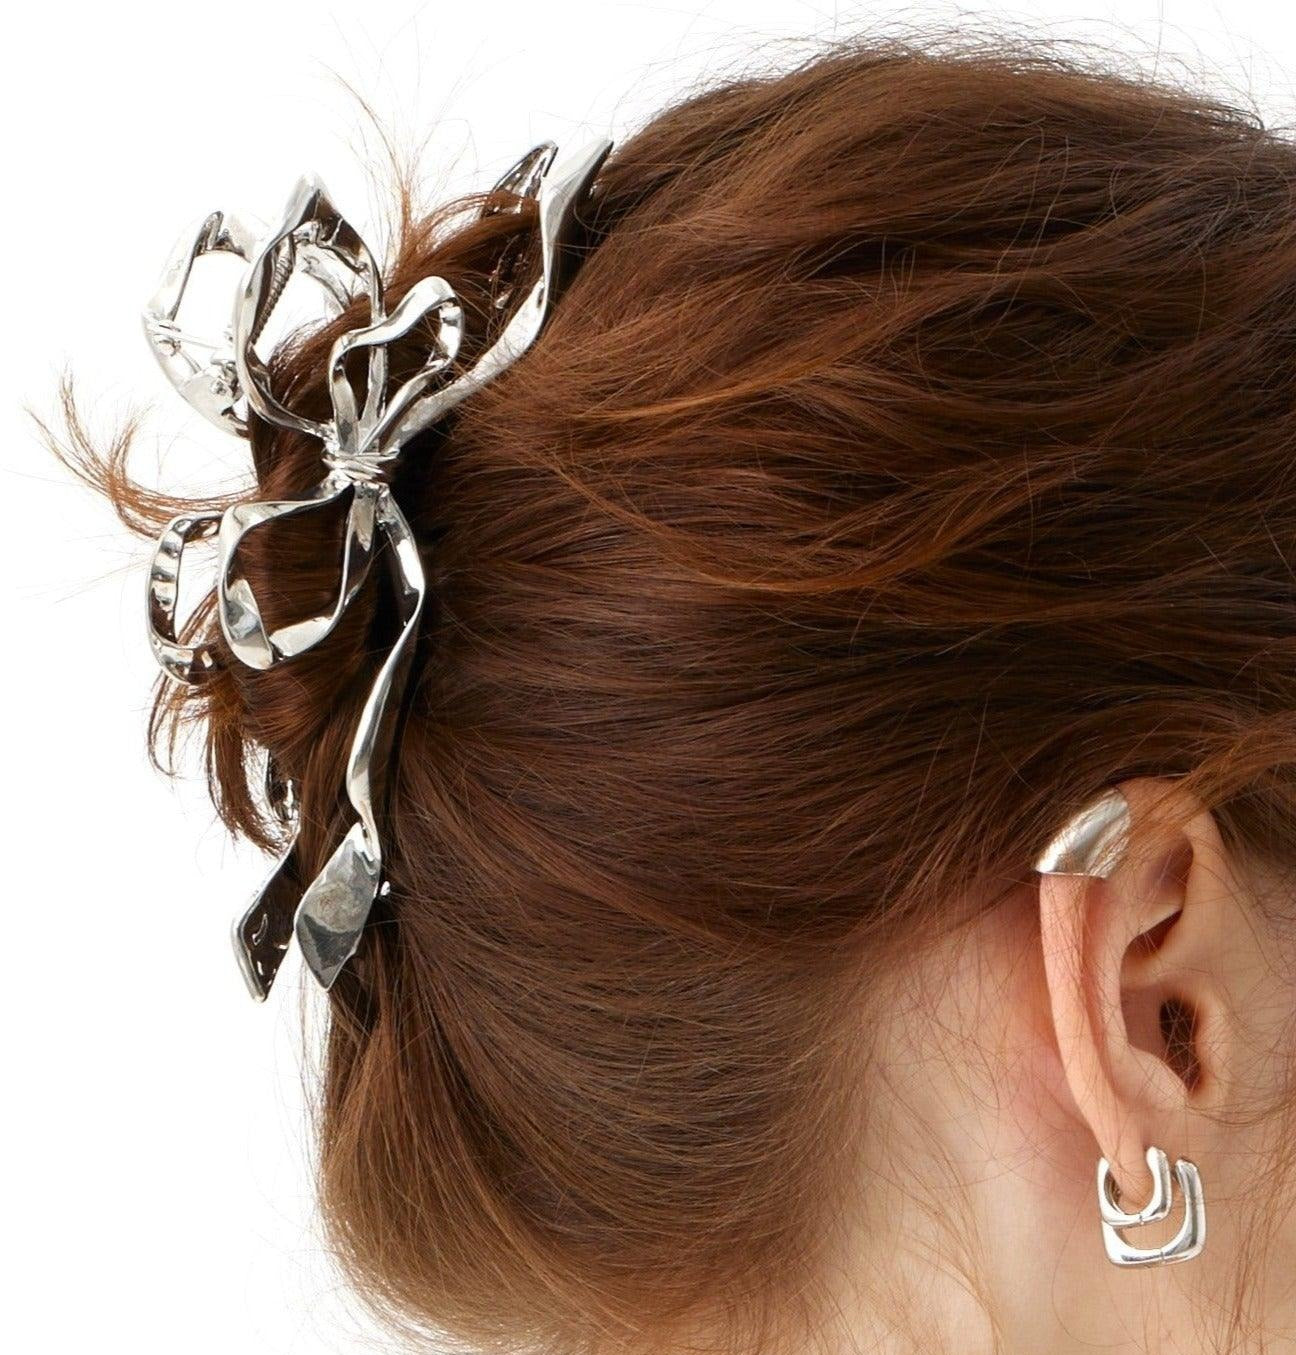 Unleash Your Unique Vibe: Embrace the Rebel in You with UNIQVIBE’s Metal Bowknot Hair Claw Clips